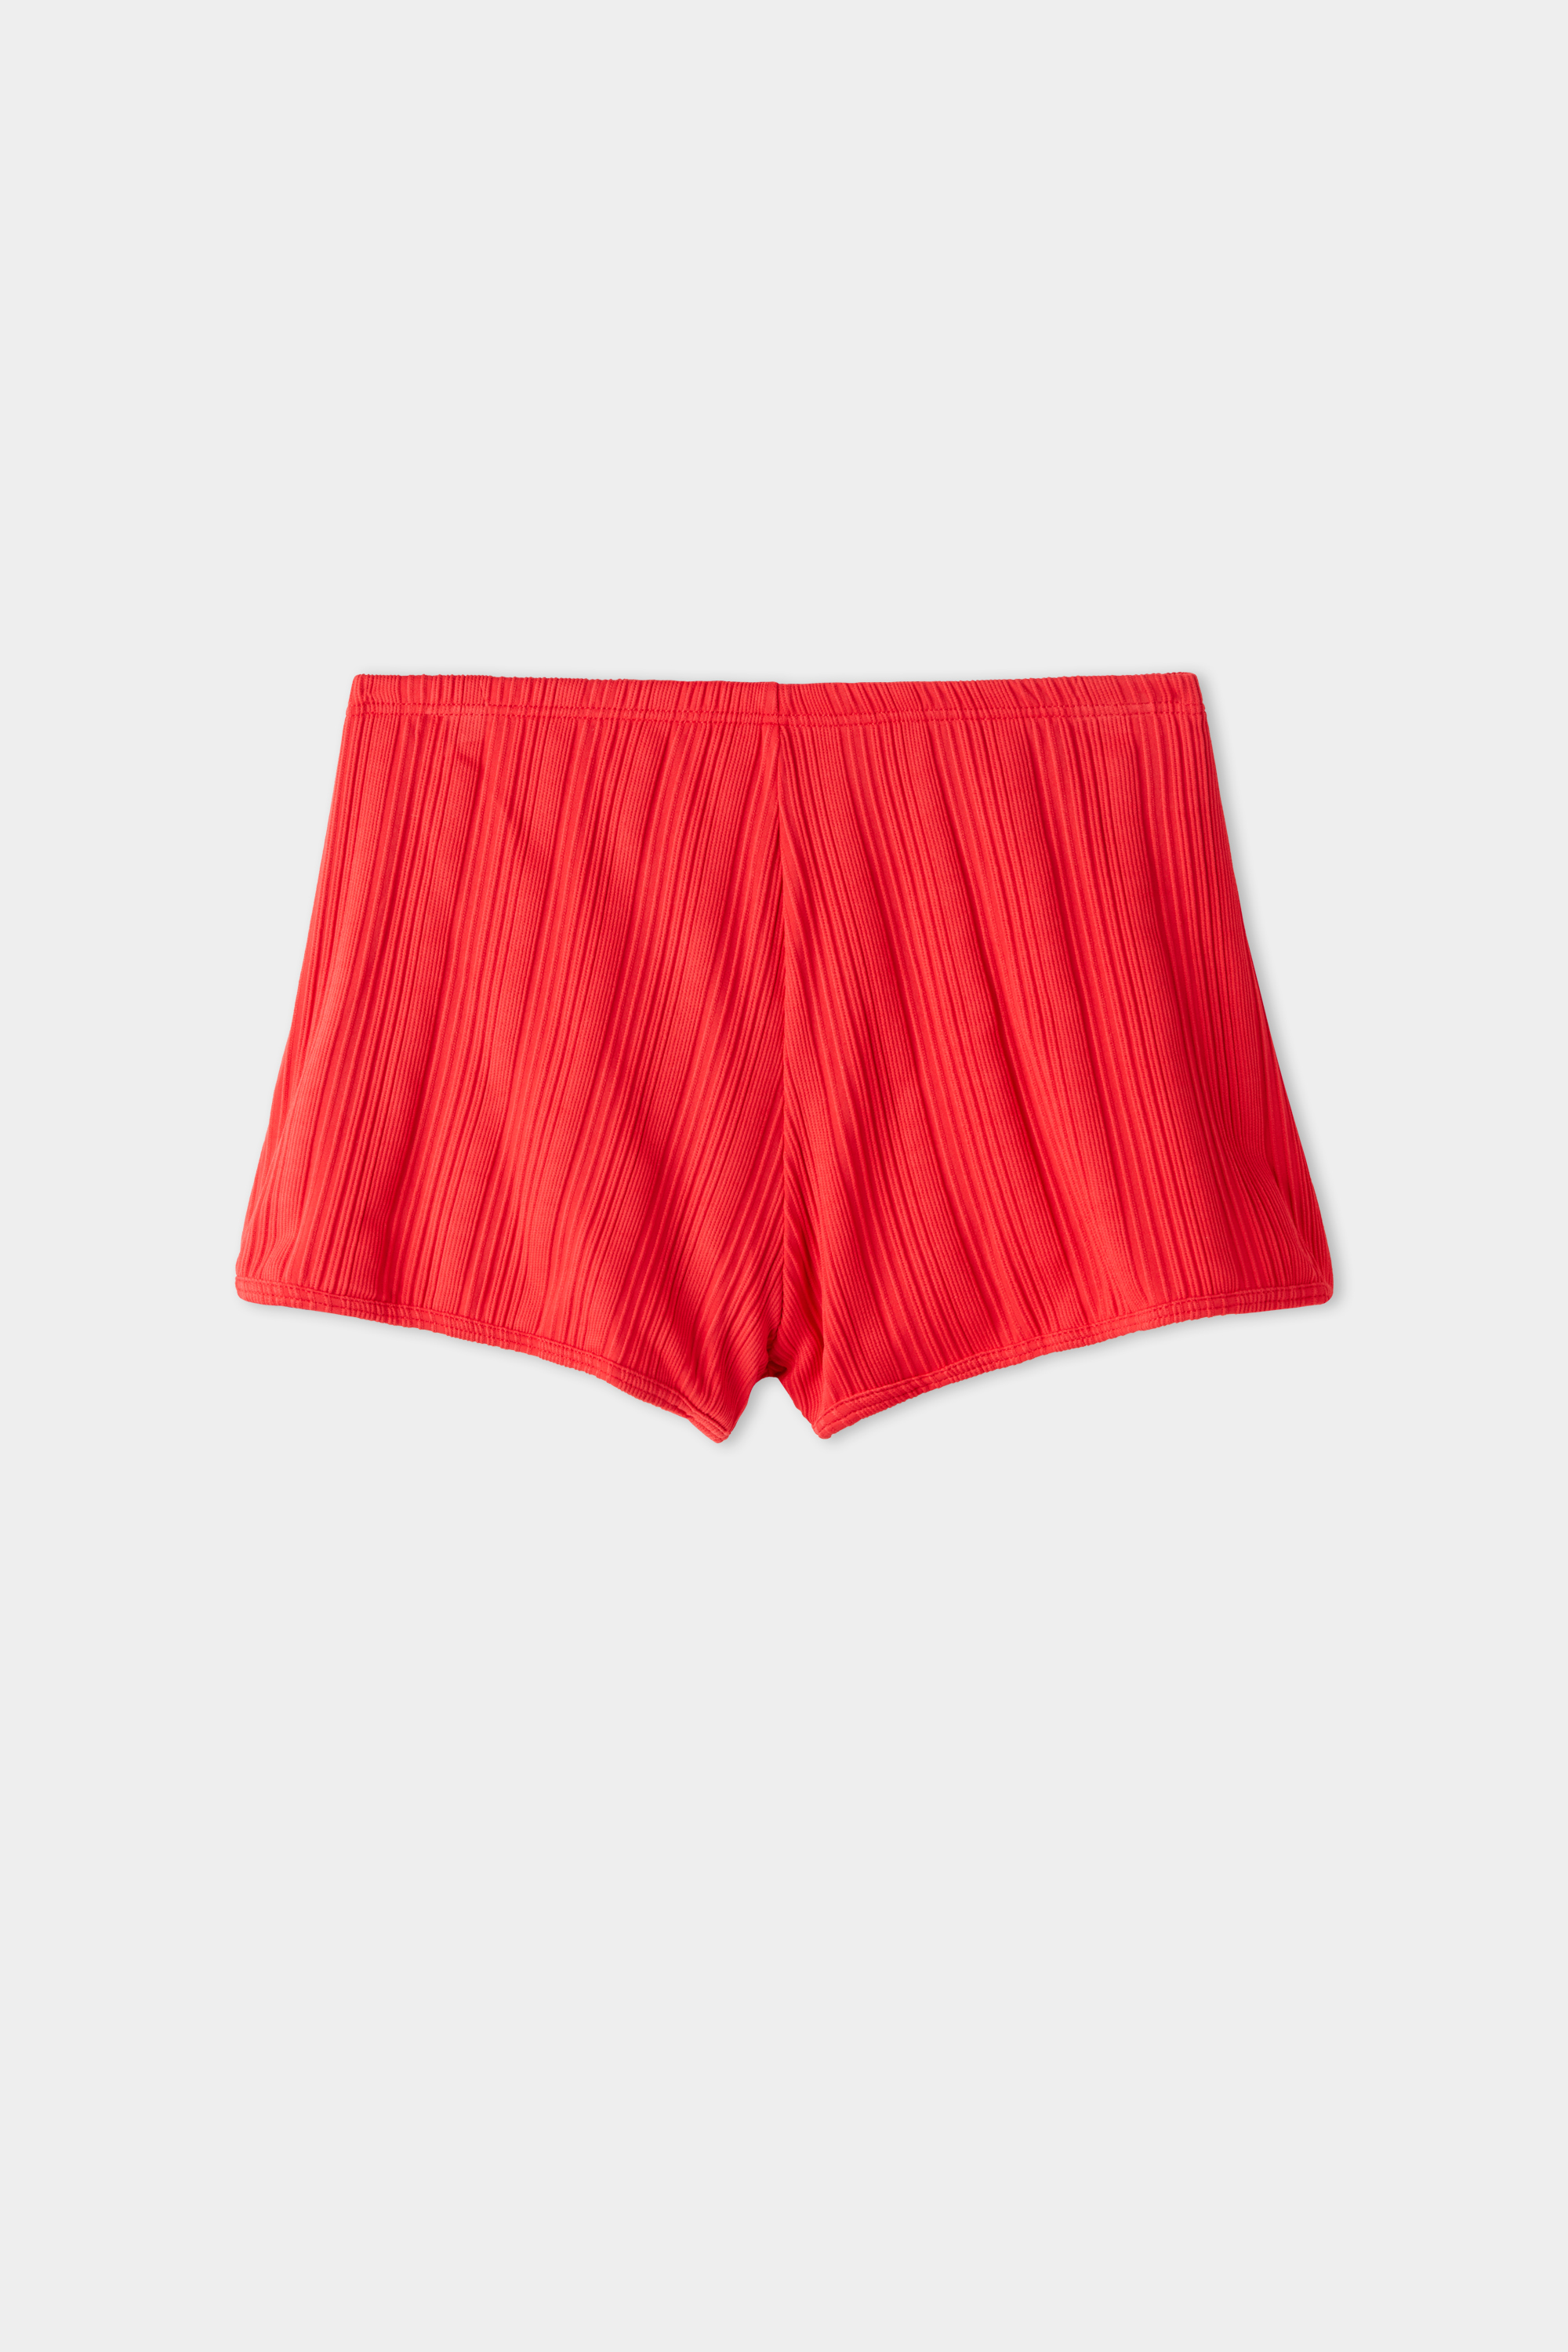 Red Recycled Ribbed French Cut Bikini Bottoms with High Waist